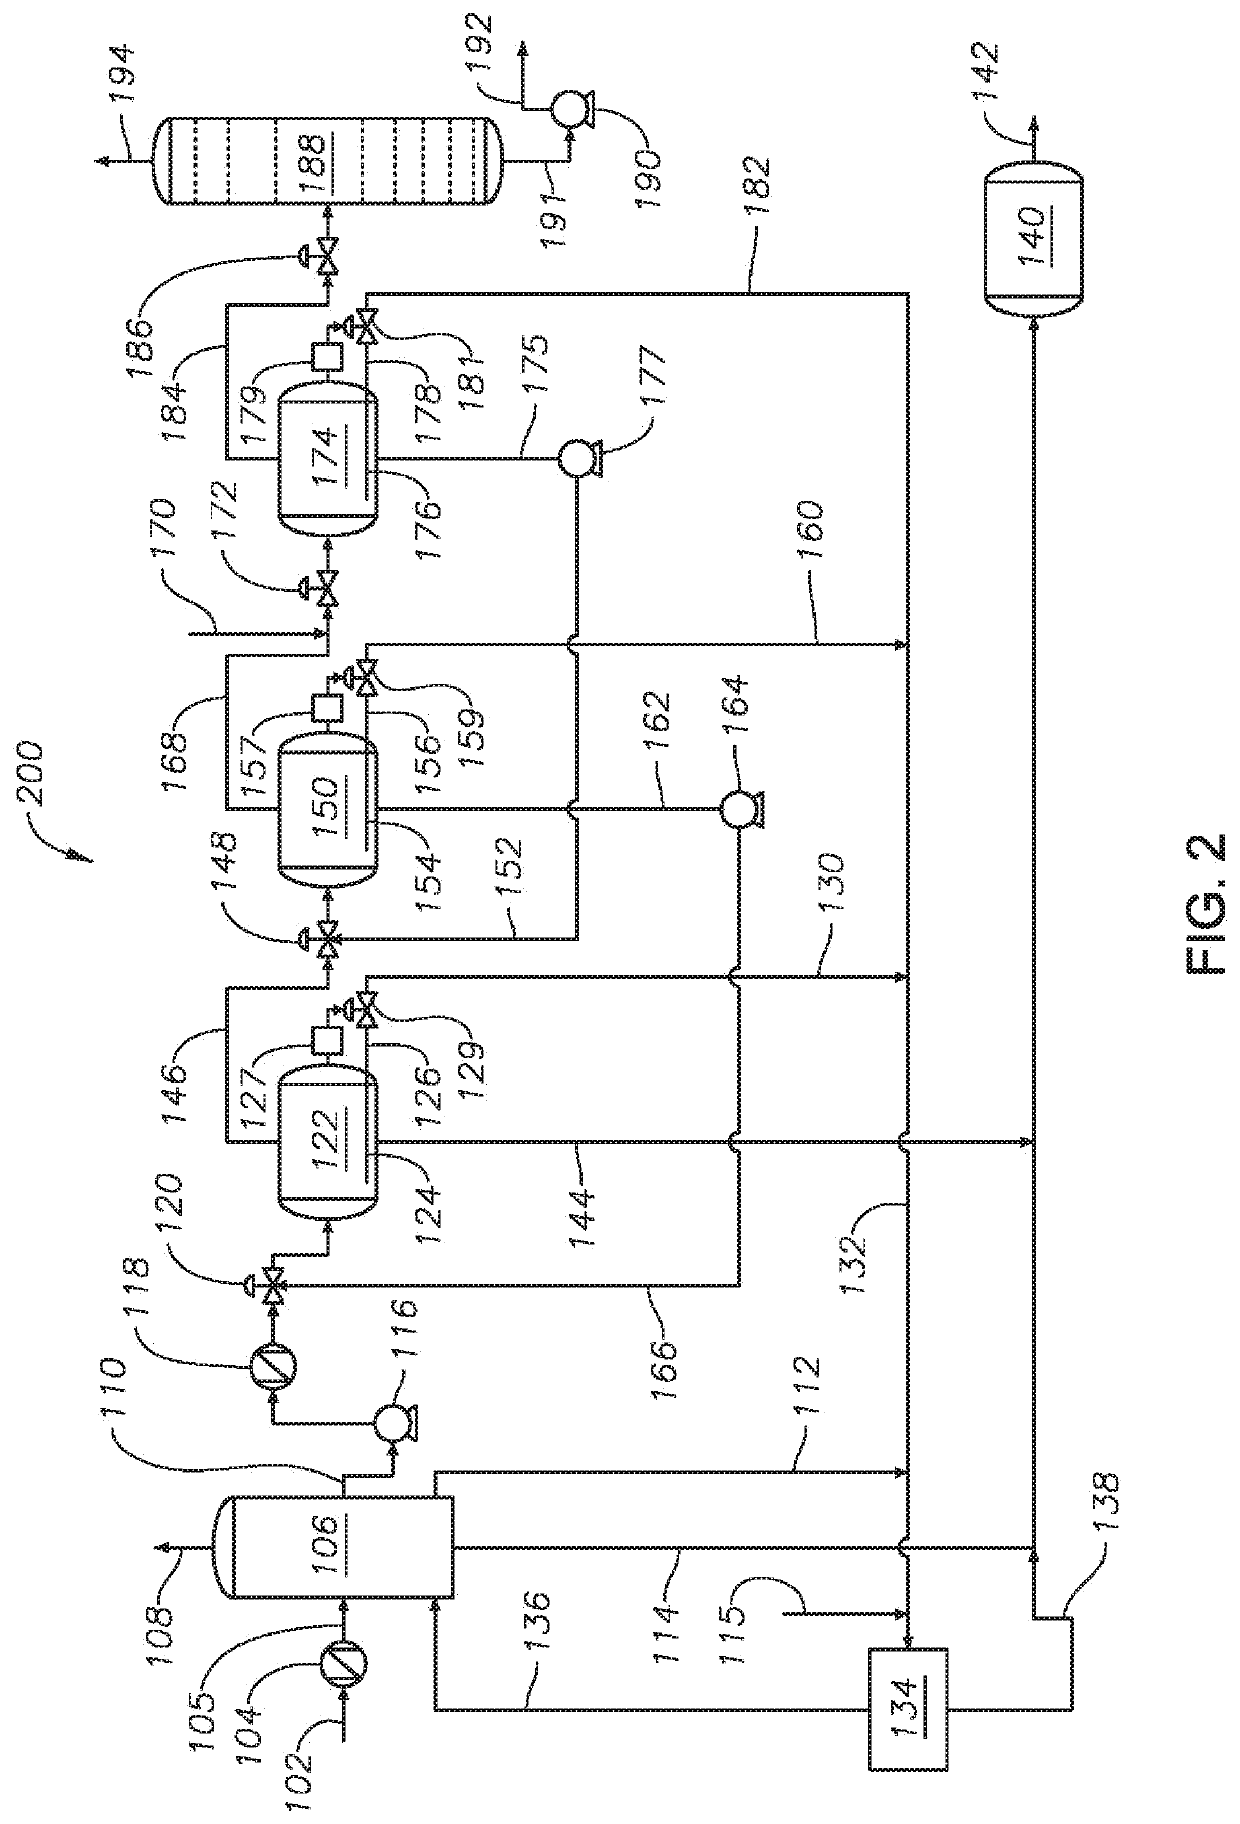 Desalting plant systems and methods for enhanced tight emulsion crude oil treatment